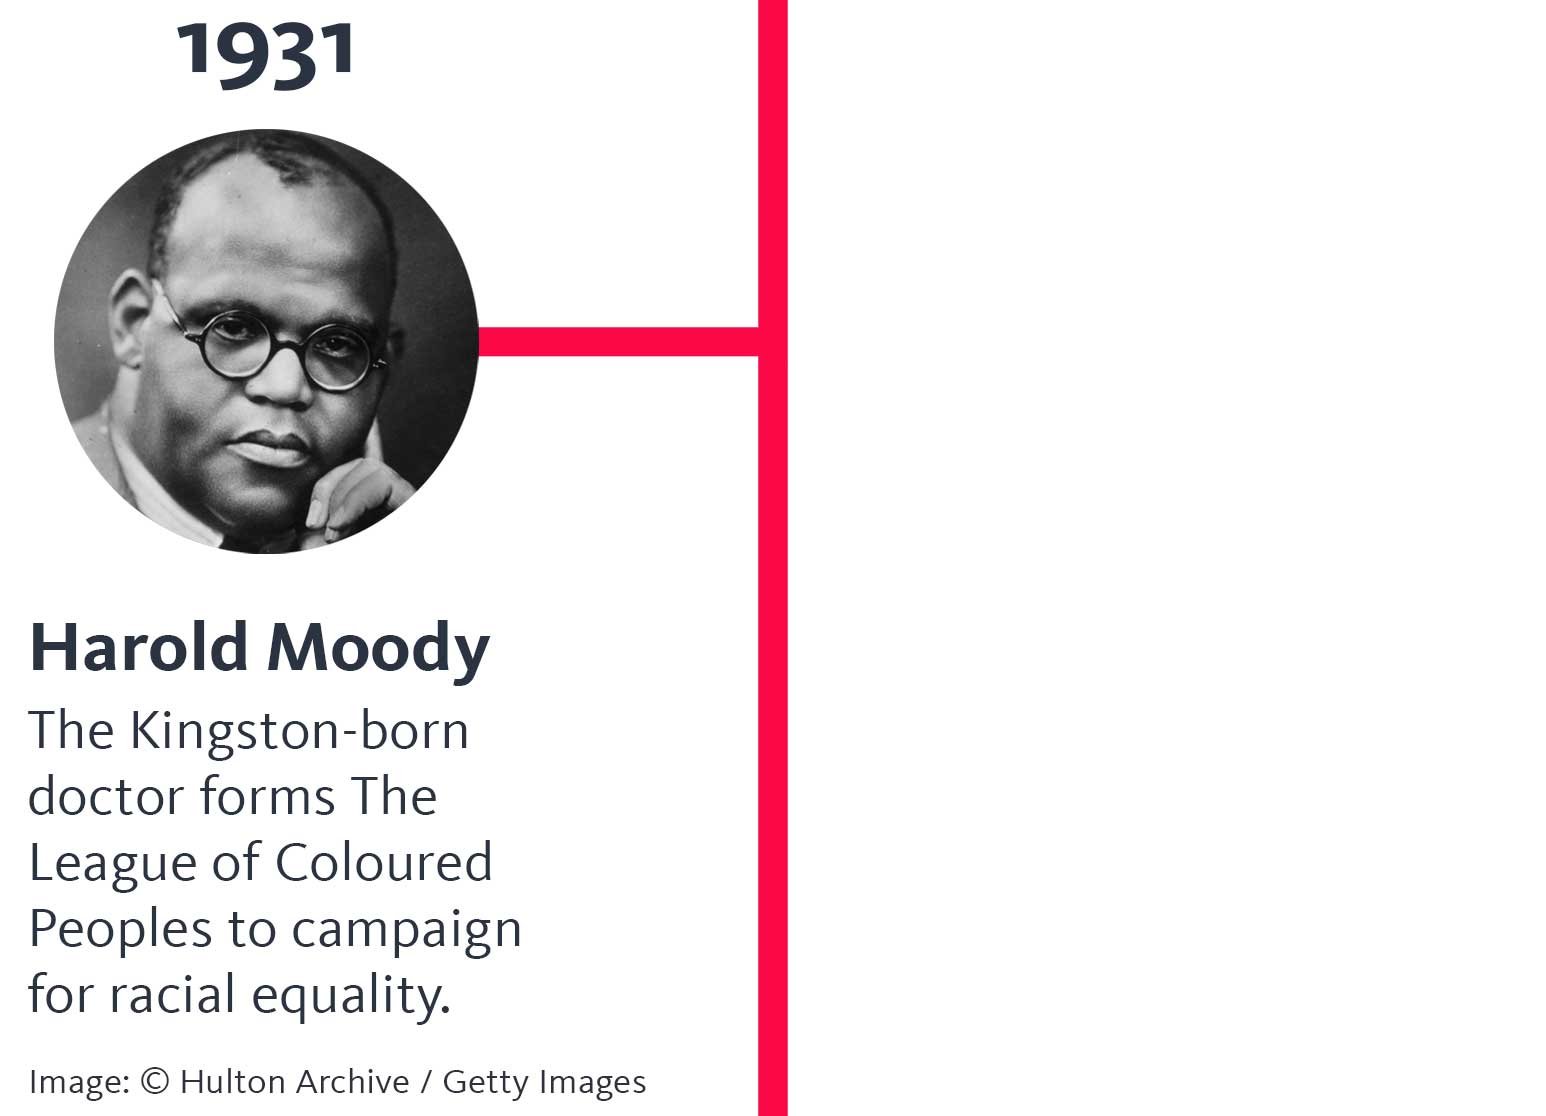 The year '1931' appears above a photo of Harold Moody with a serious expression, holding his hand against his face. A heading below says 'The Kingston-born doctor forms The League of Coloured Peoples to campaign for racial equality.' and below that, 'Image: Department of Special Collections & University Archives, W.E.B. Du Bois Library, University of Massachusetts Amherst', and a button says 'Explore his story'.